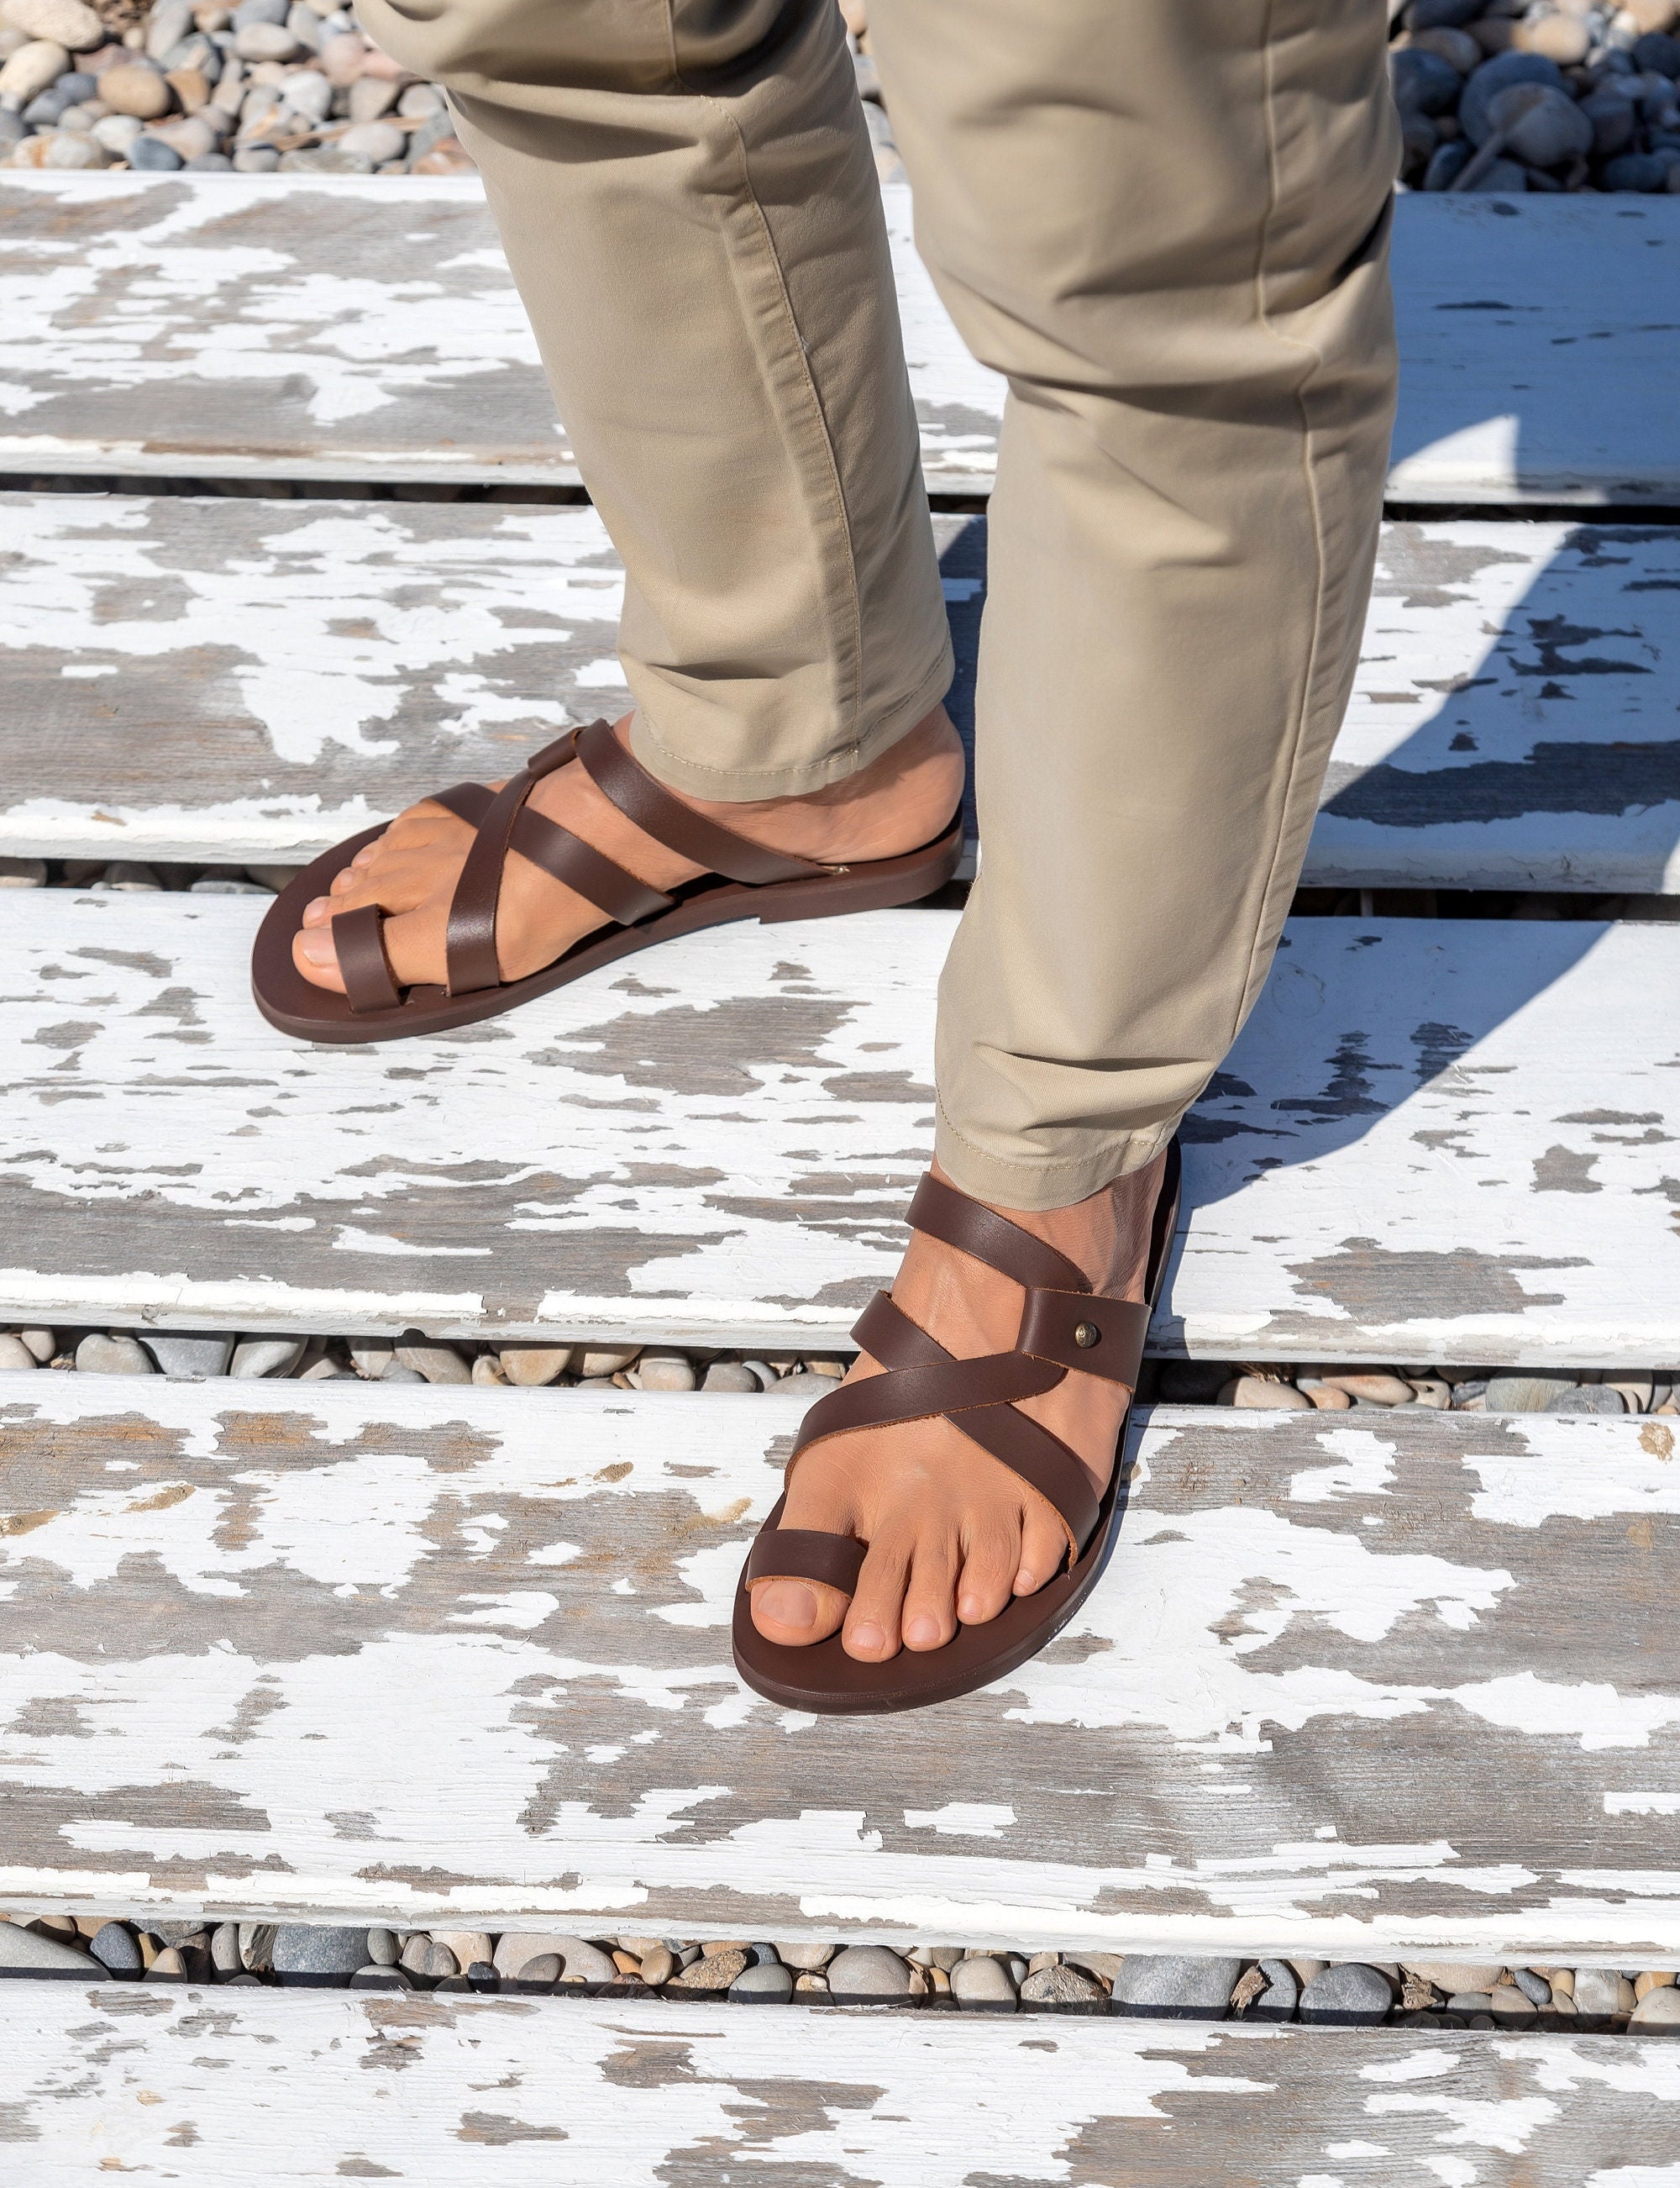 Share more than 301 cheap mens leather sandals super hot